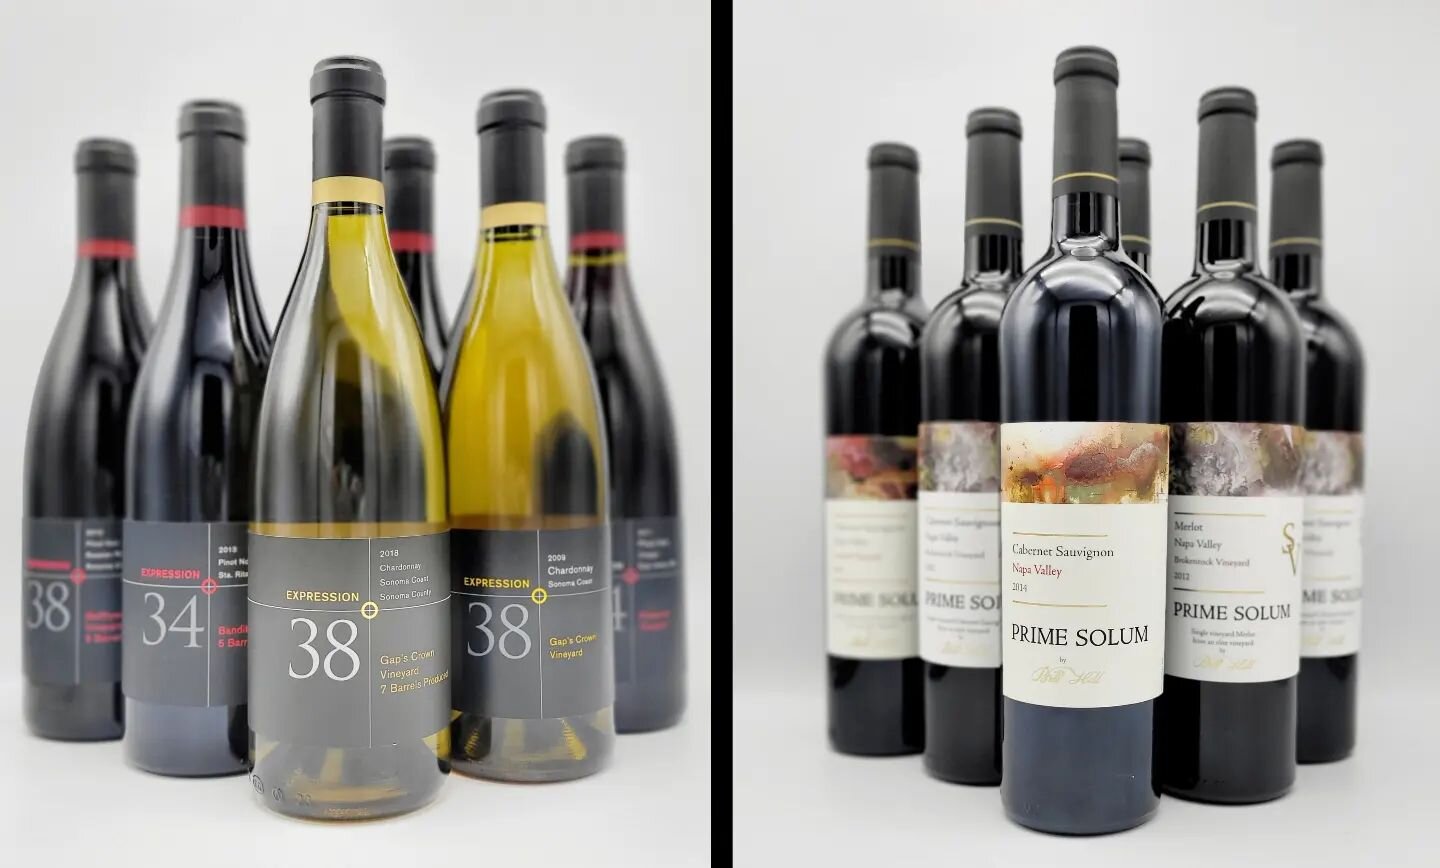 Want our September selection of wine club wines? It's not too late, but some of these wines are down to less than a case! DM or email Bre@primesolum.com to get your bottles. 
Extra wine club member perks:
-discounts on wine
-discounts on rooms @silve